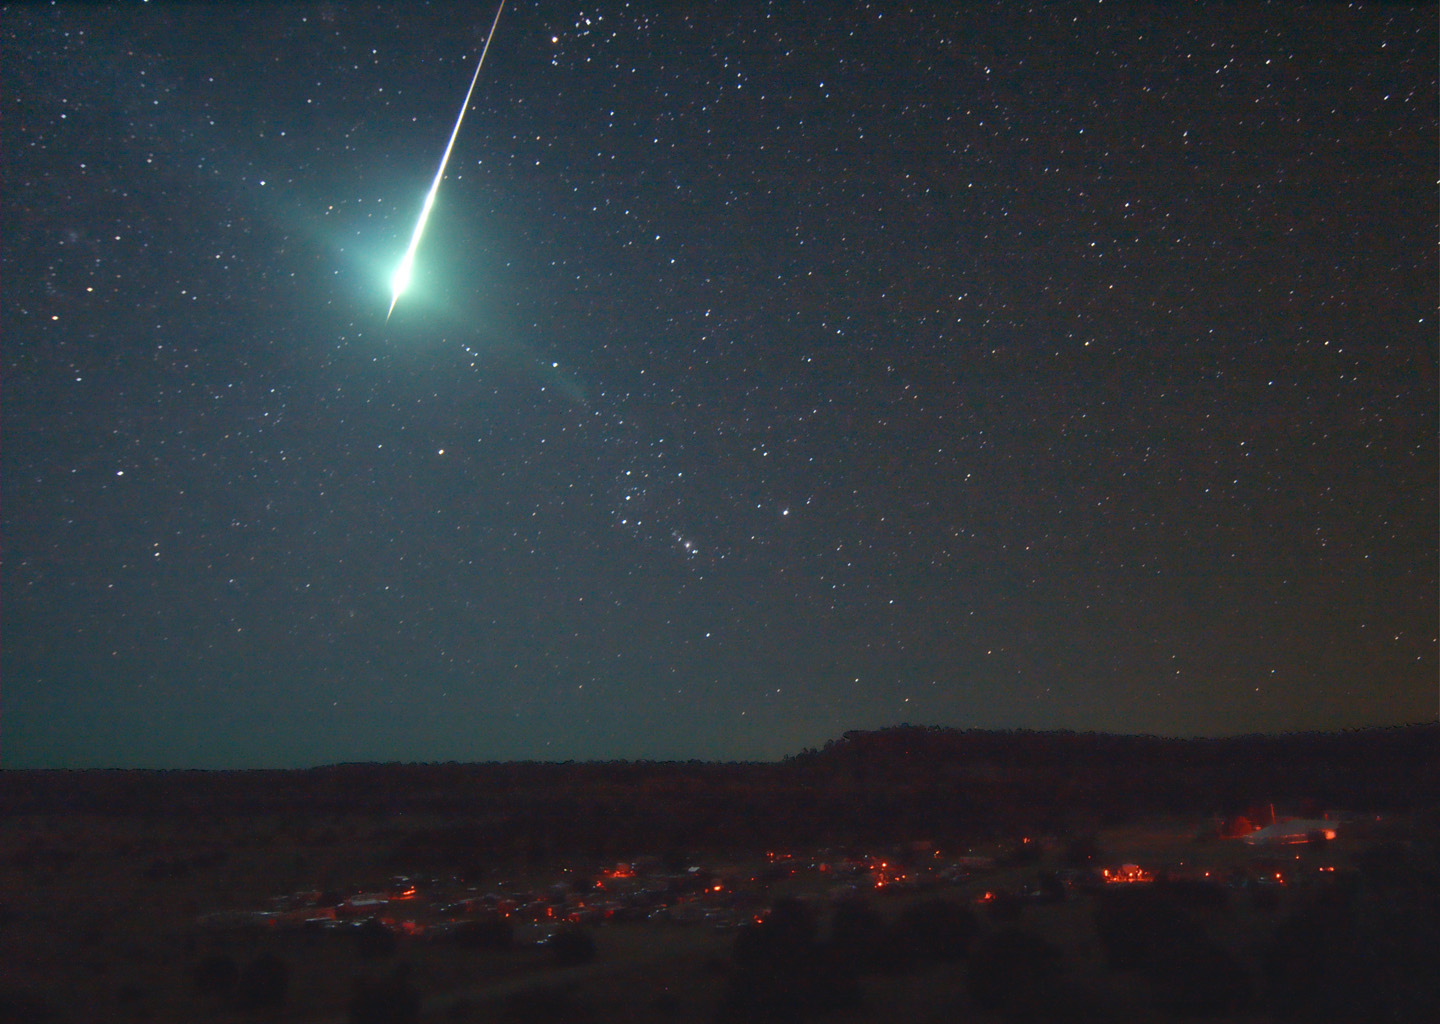 Bolides shown: very bright meteors that can even be seen in daylight